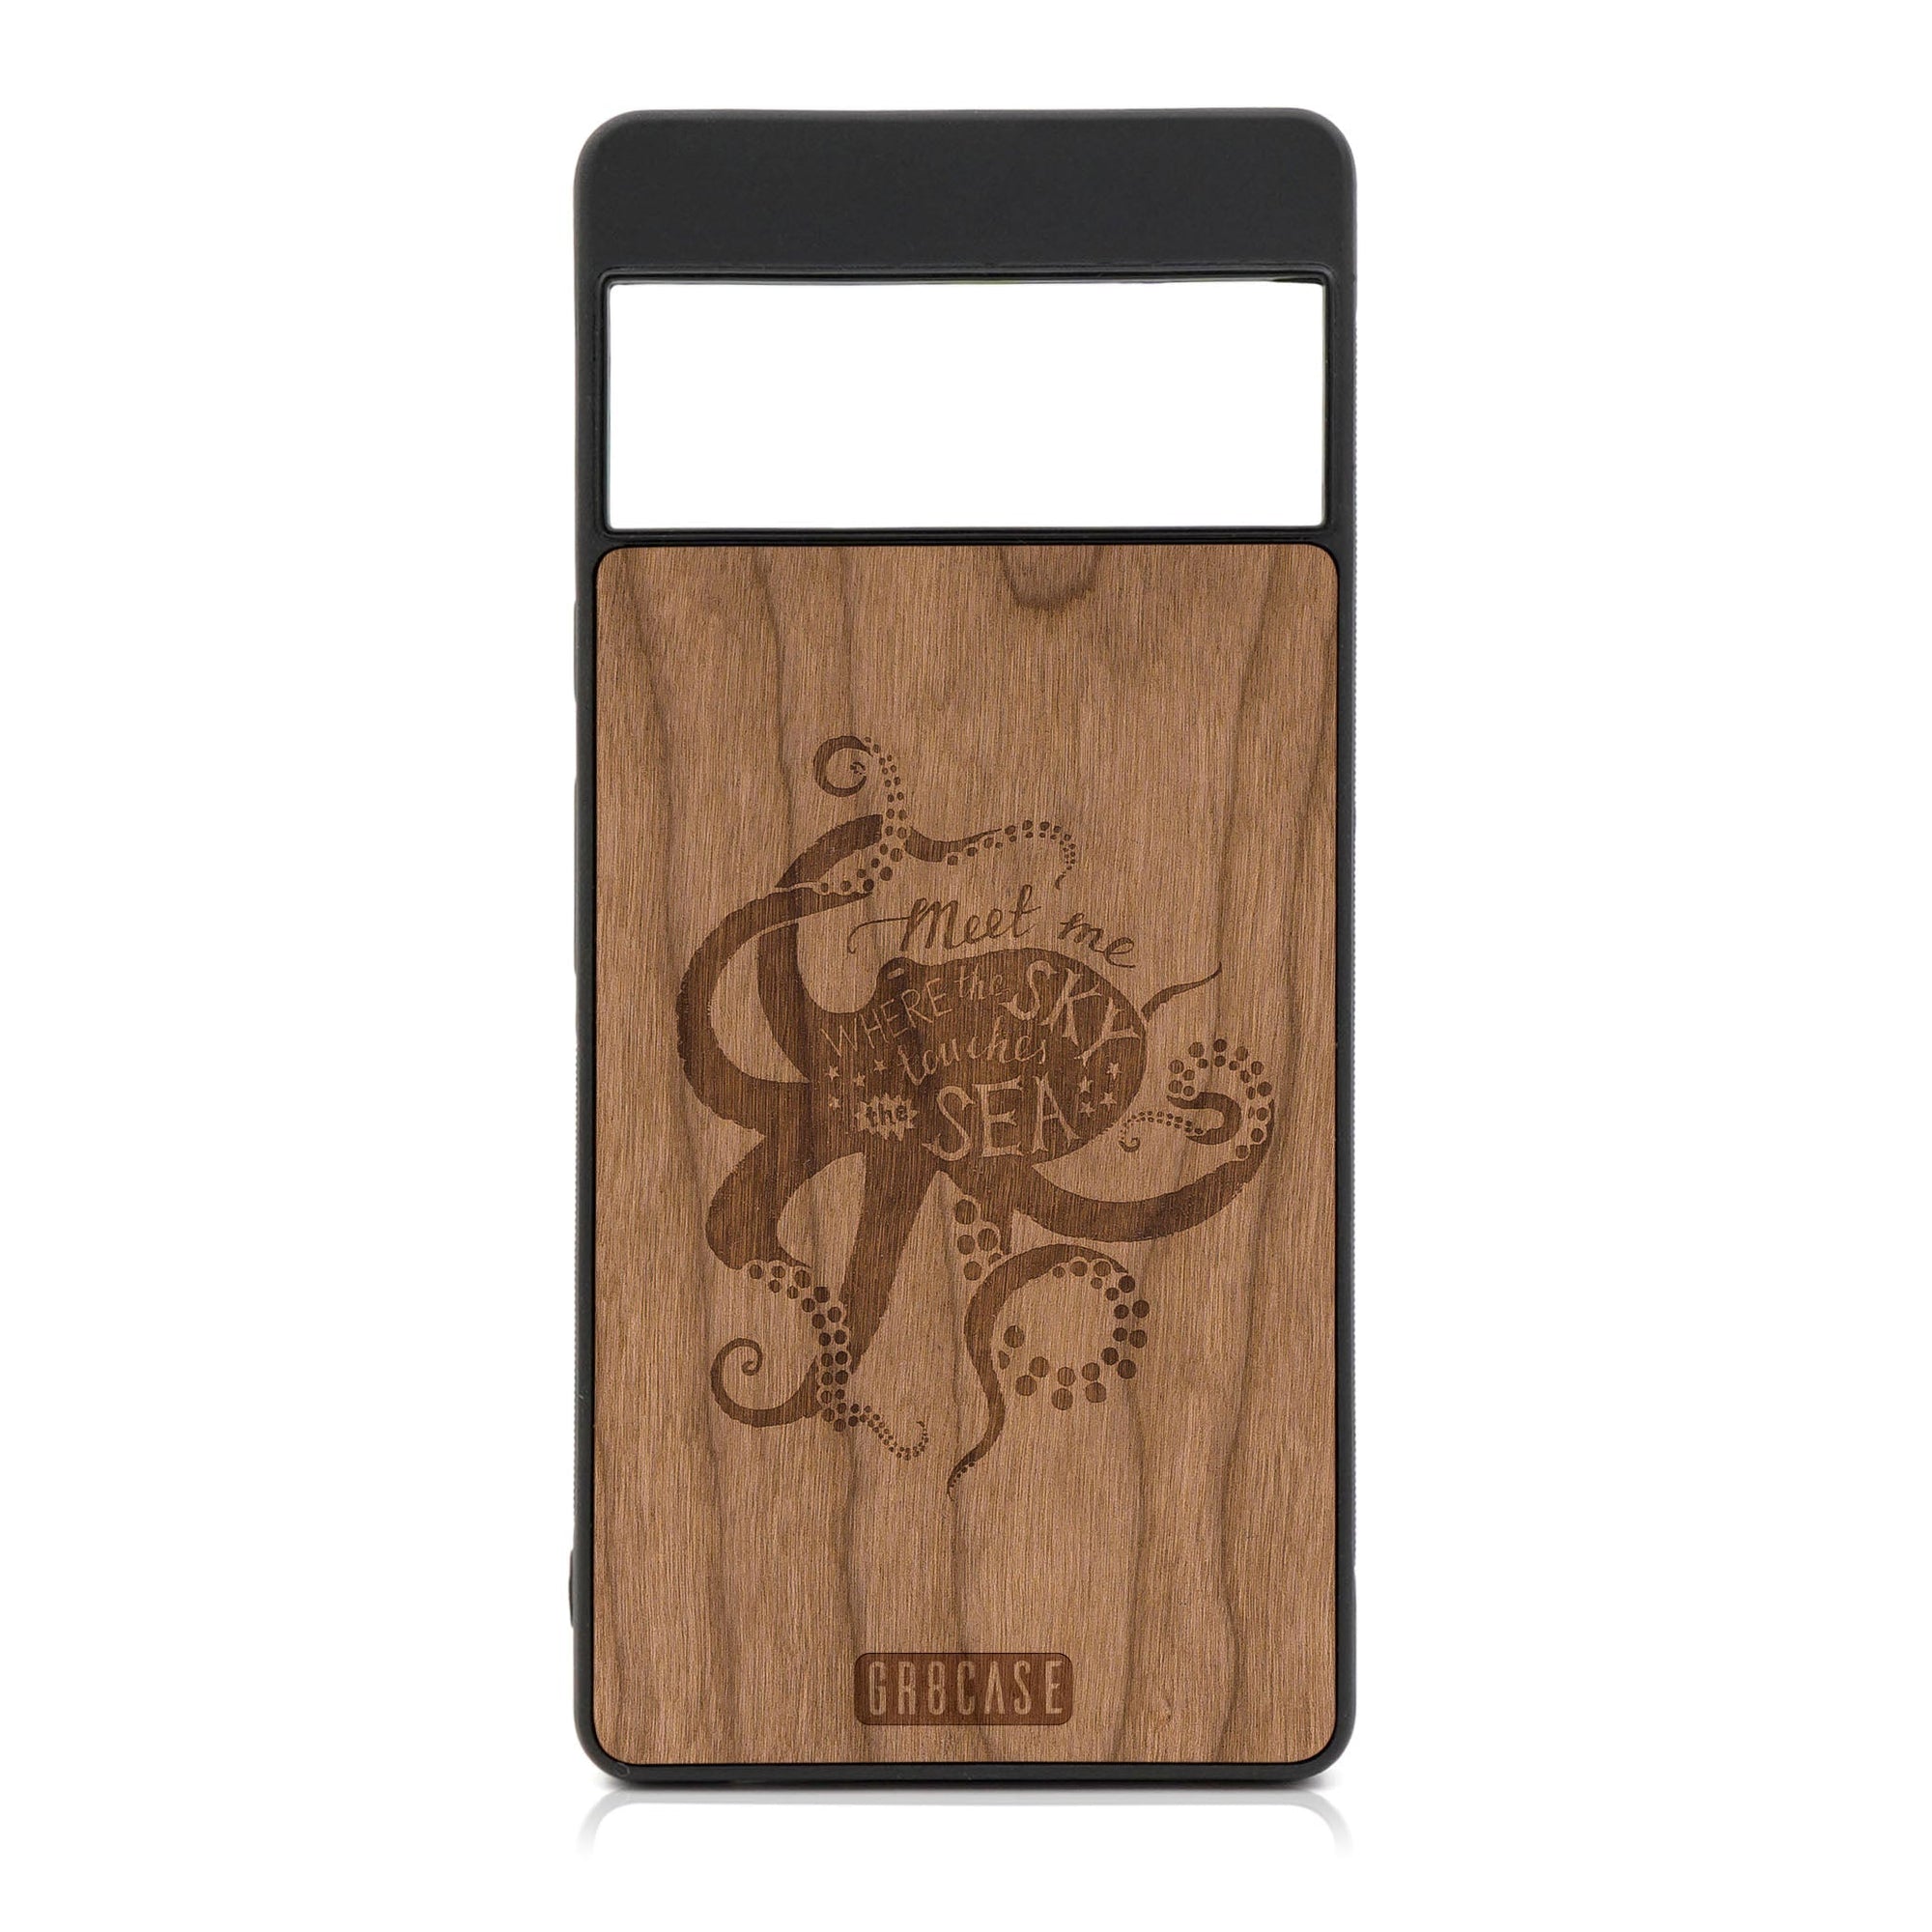 Meet Me Where The Sky Touches The Sea (Octopus) Design Wood Case For Google Pixel 7 Pro